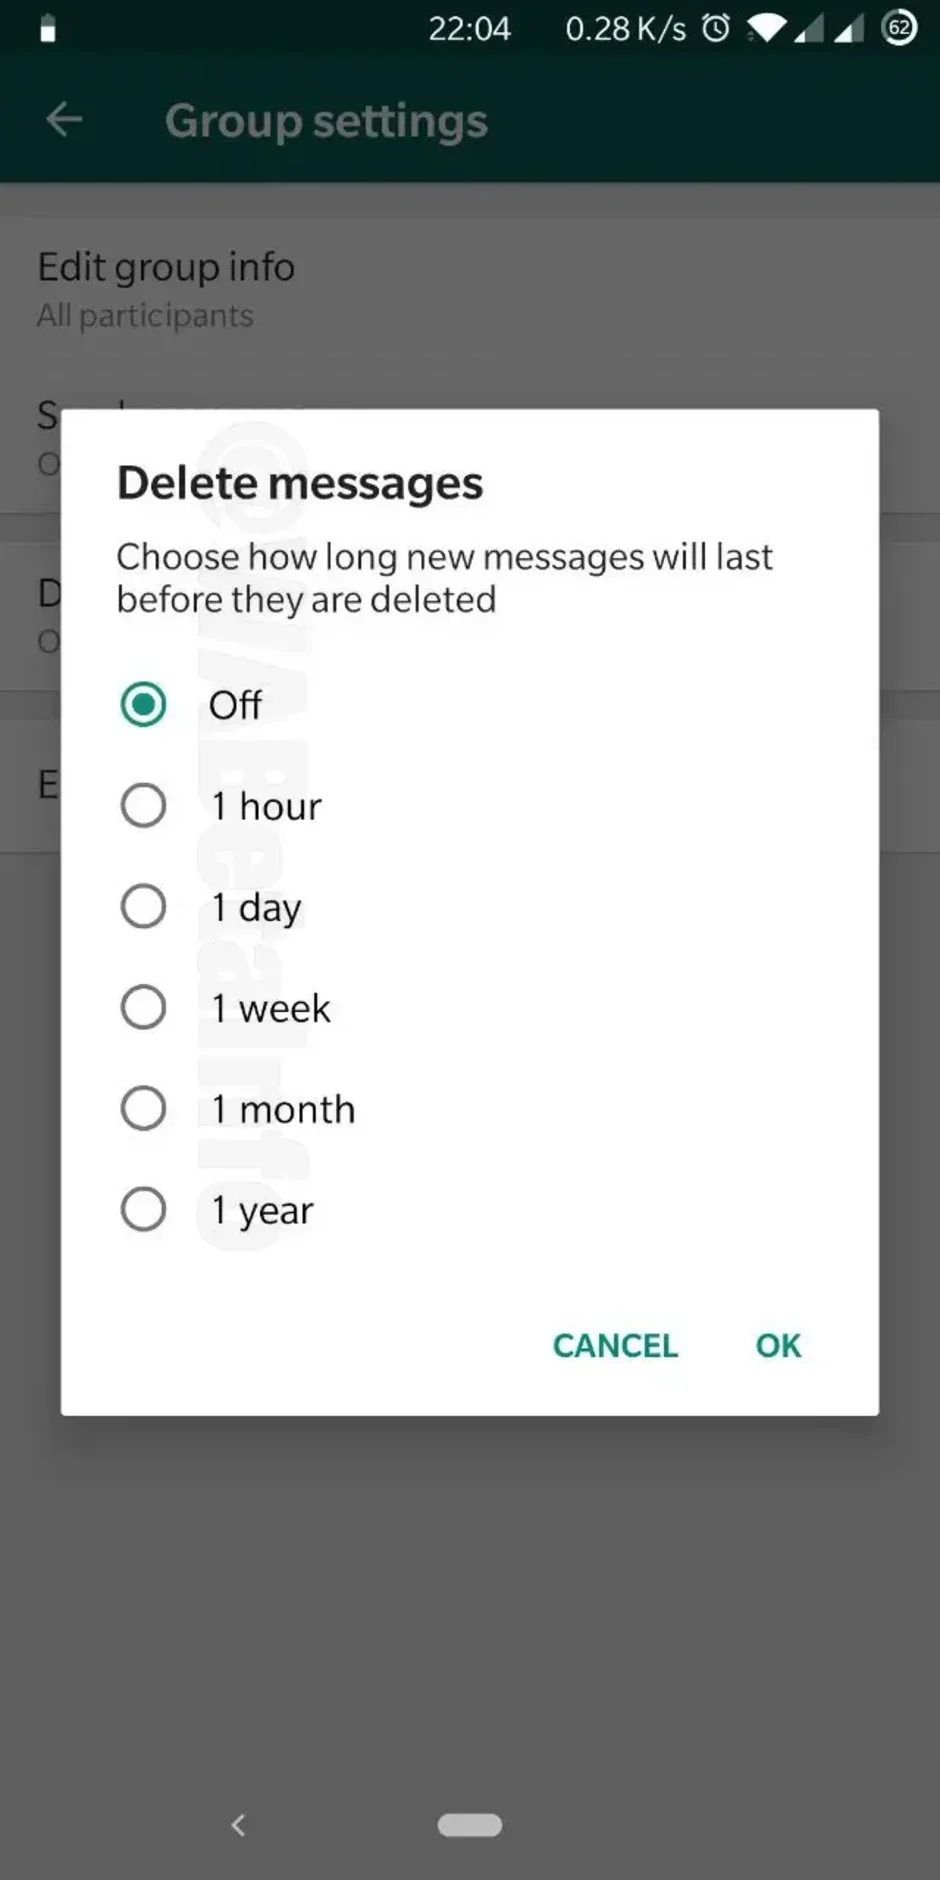 WhatsApp users might be able to automatically have messages self-destruct at various times starting next year - Take a look at some of the new features coming to WhatsApp in 2020